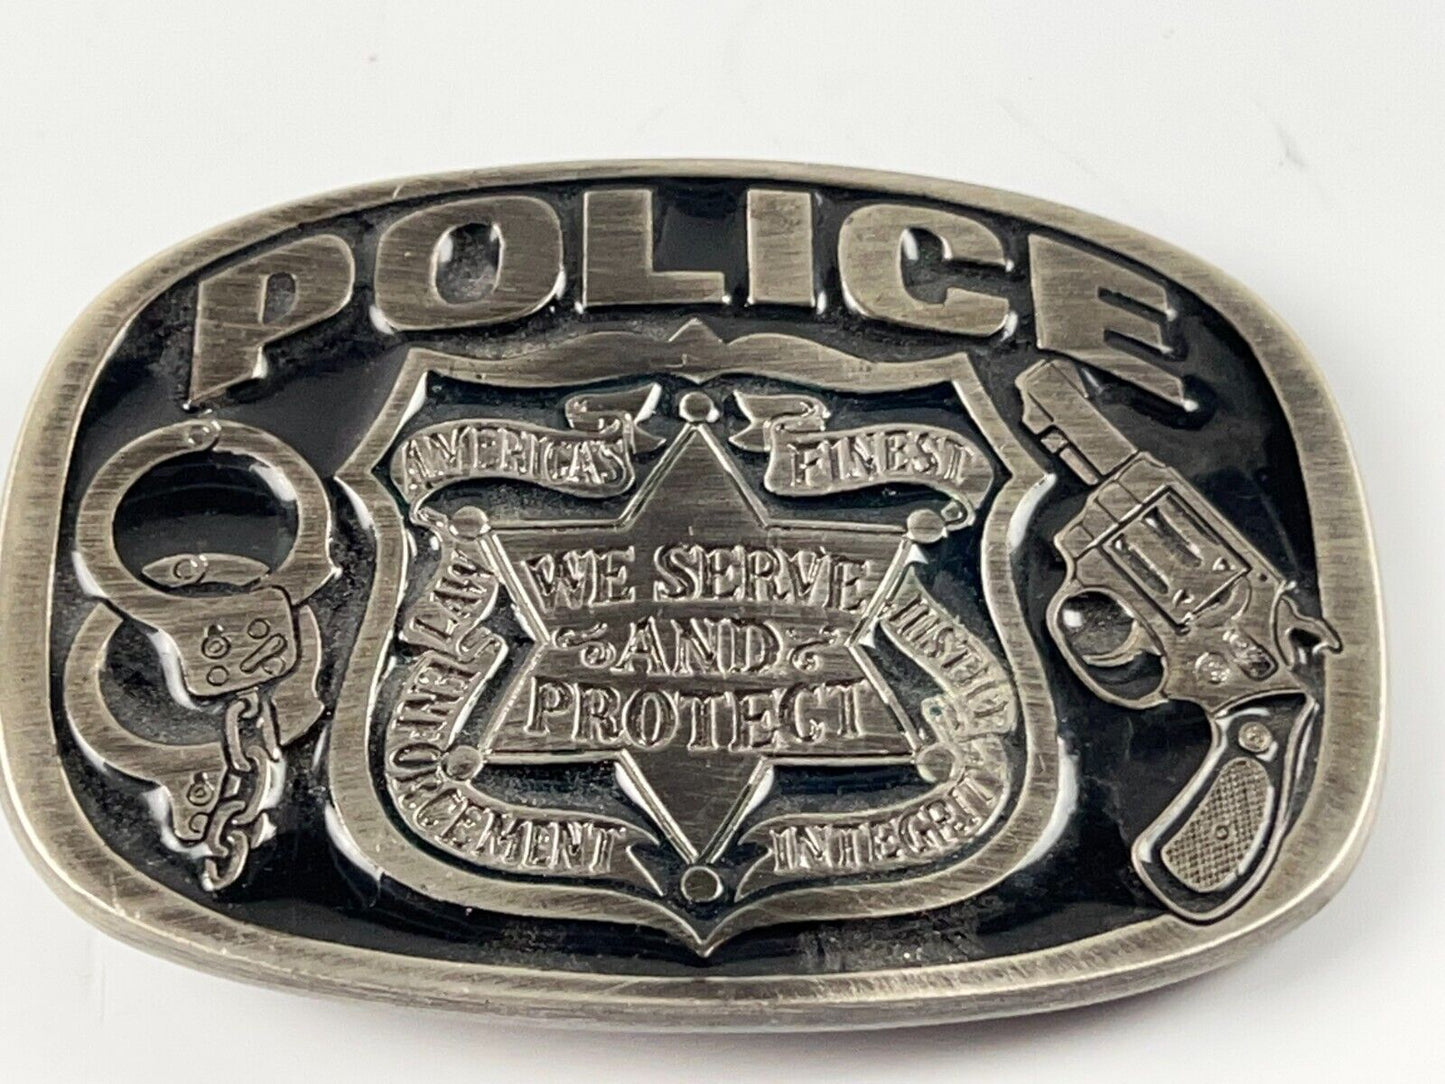 Police Belt Buckle America's Finest We Serve And Protect Buckle Bakery #1654